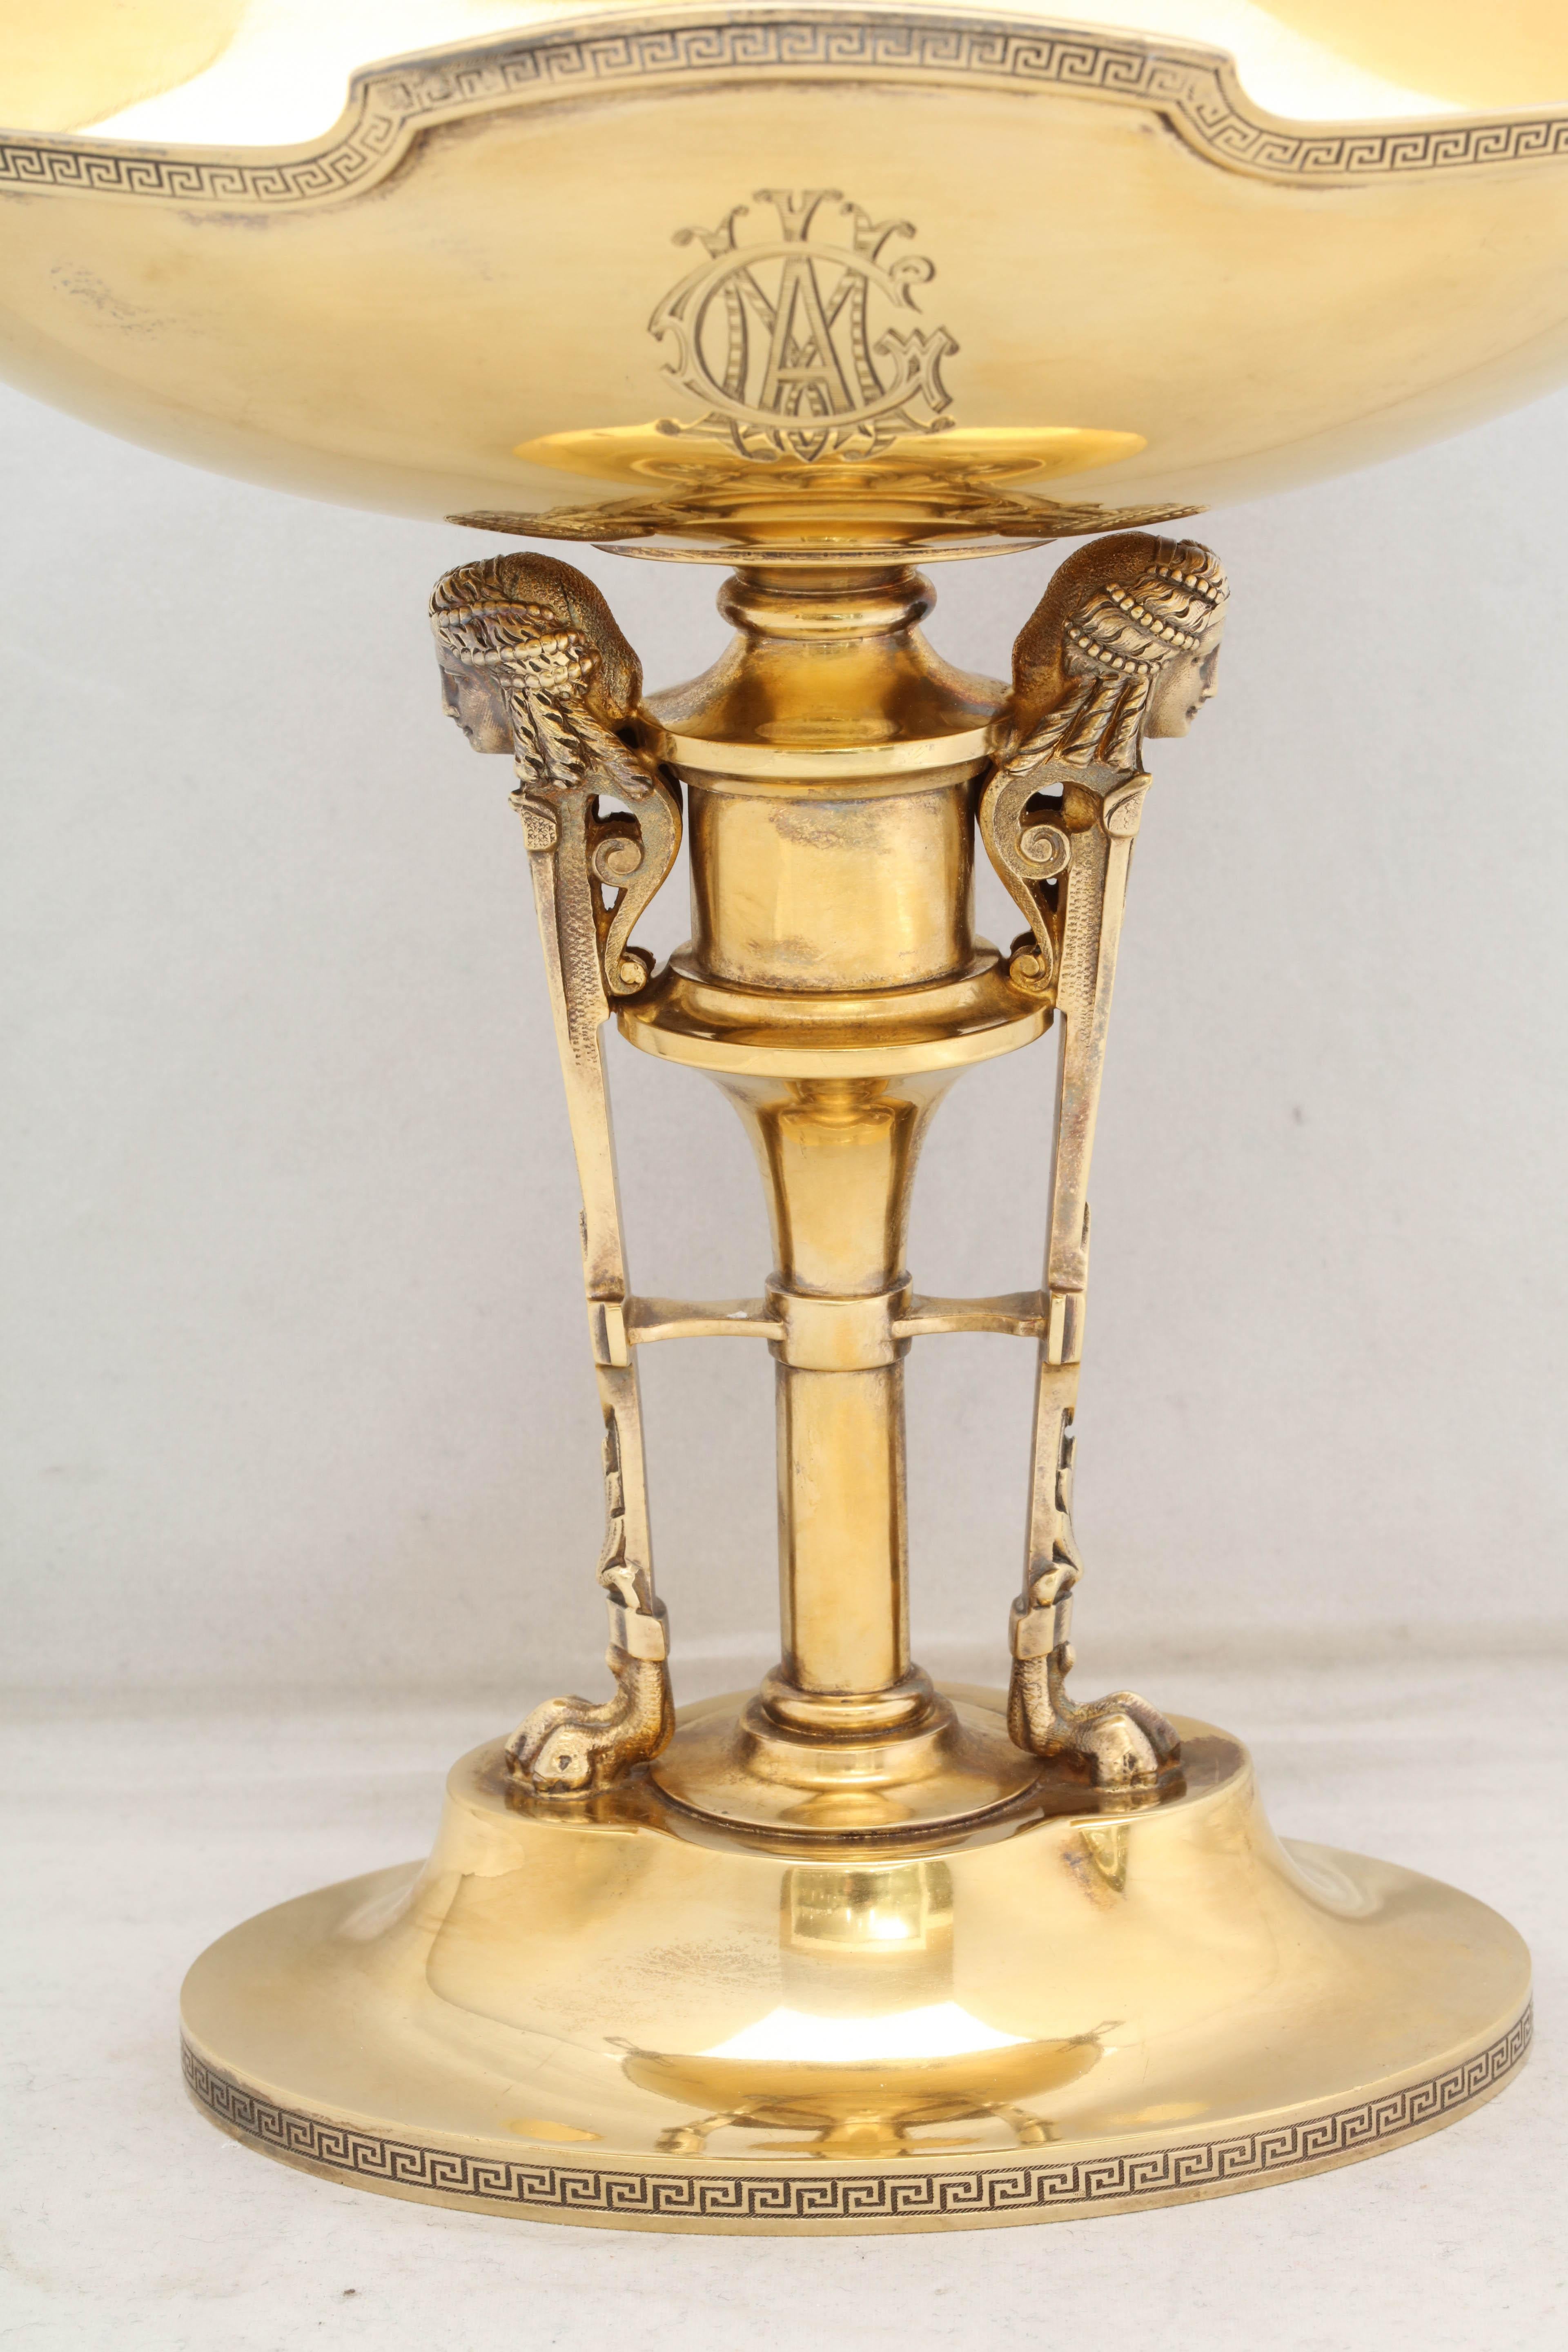 Neoclassical Sterling Silver Gilt Centrepiece by Gorham In Excellent Condition For Sale In New York, NY